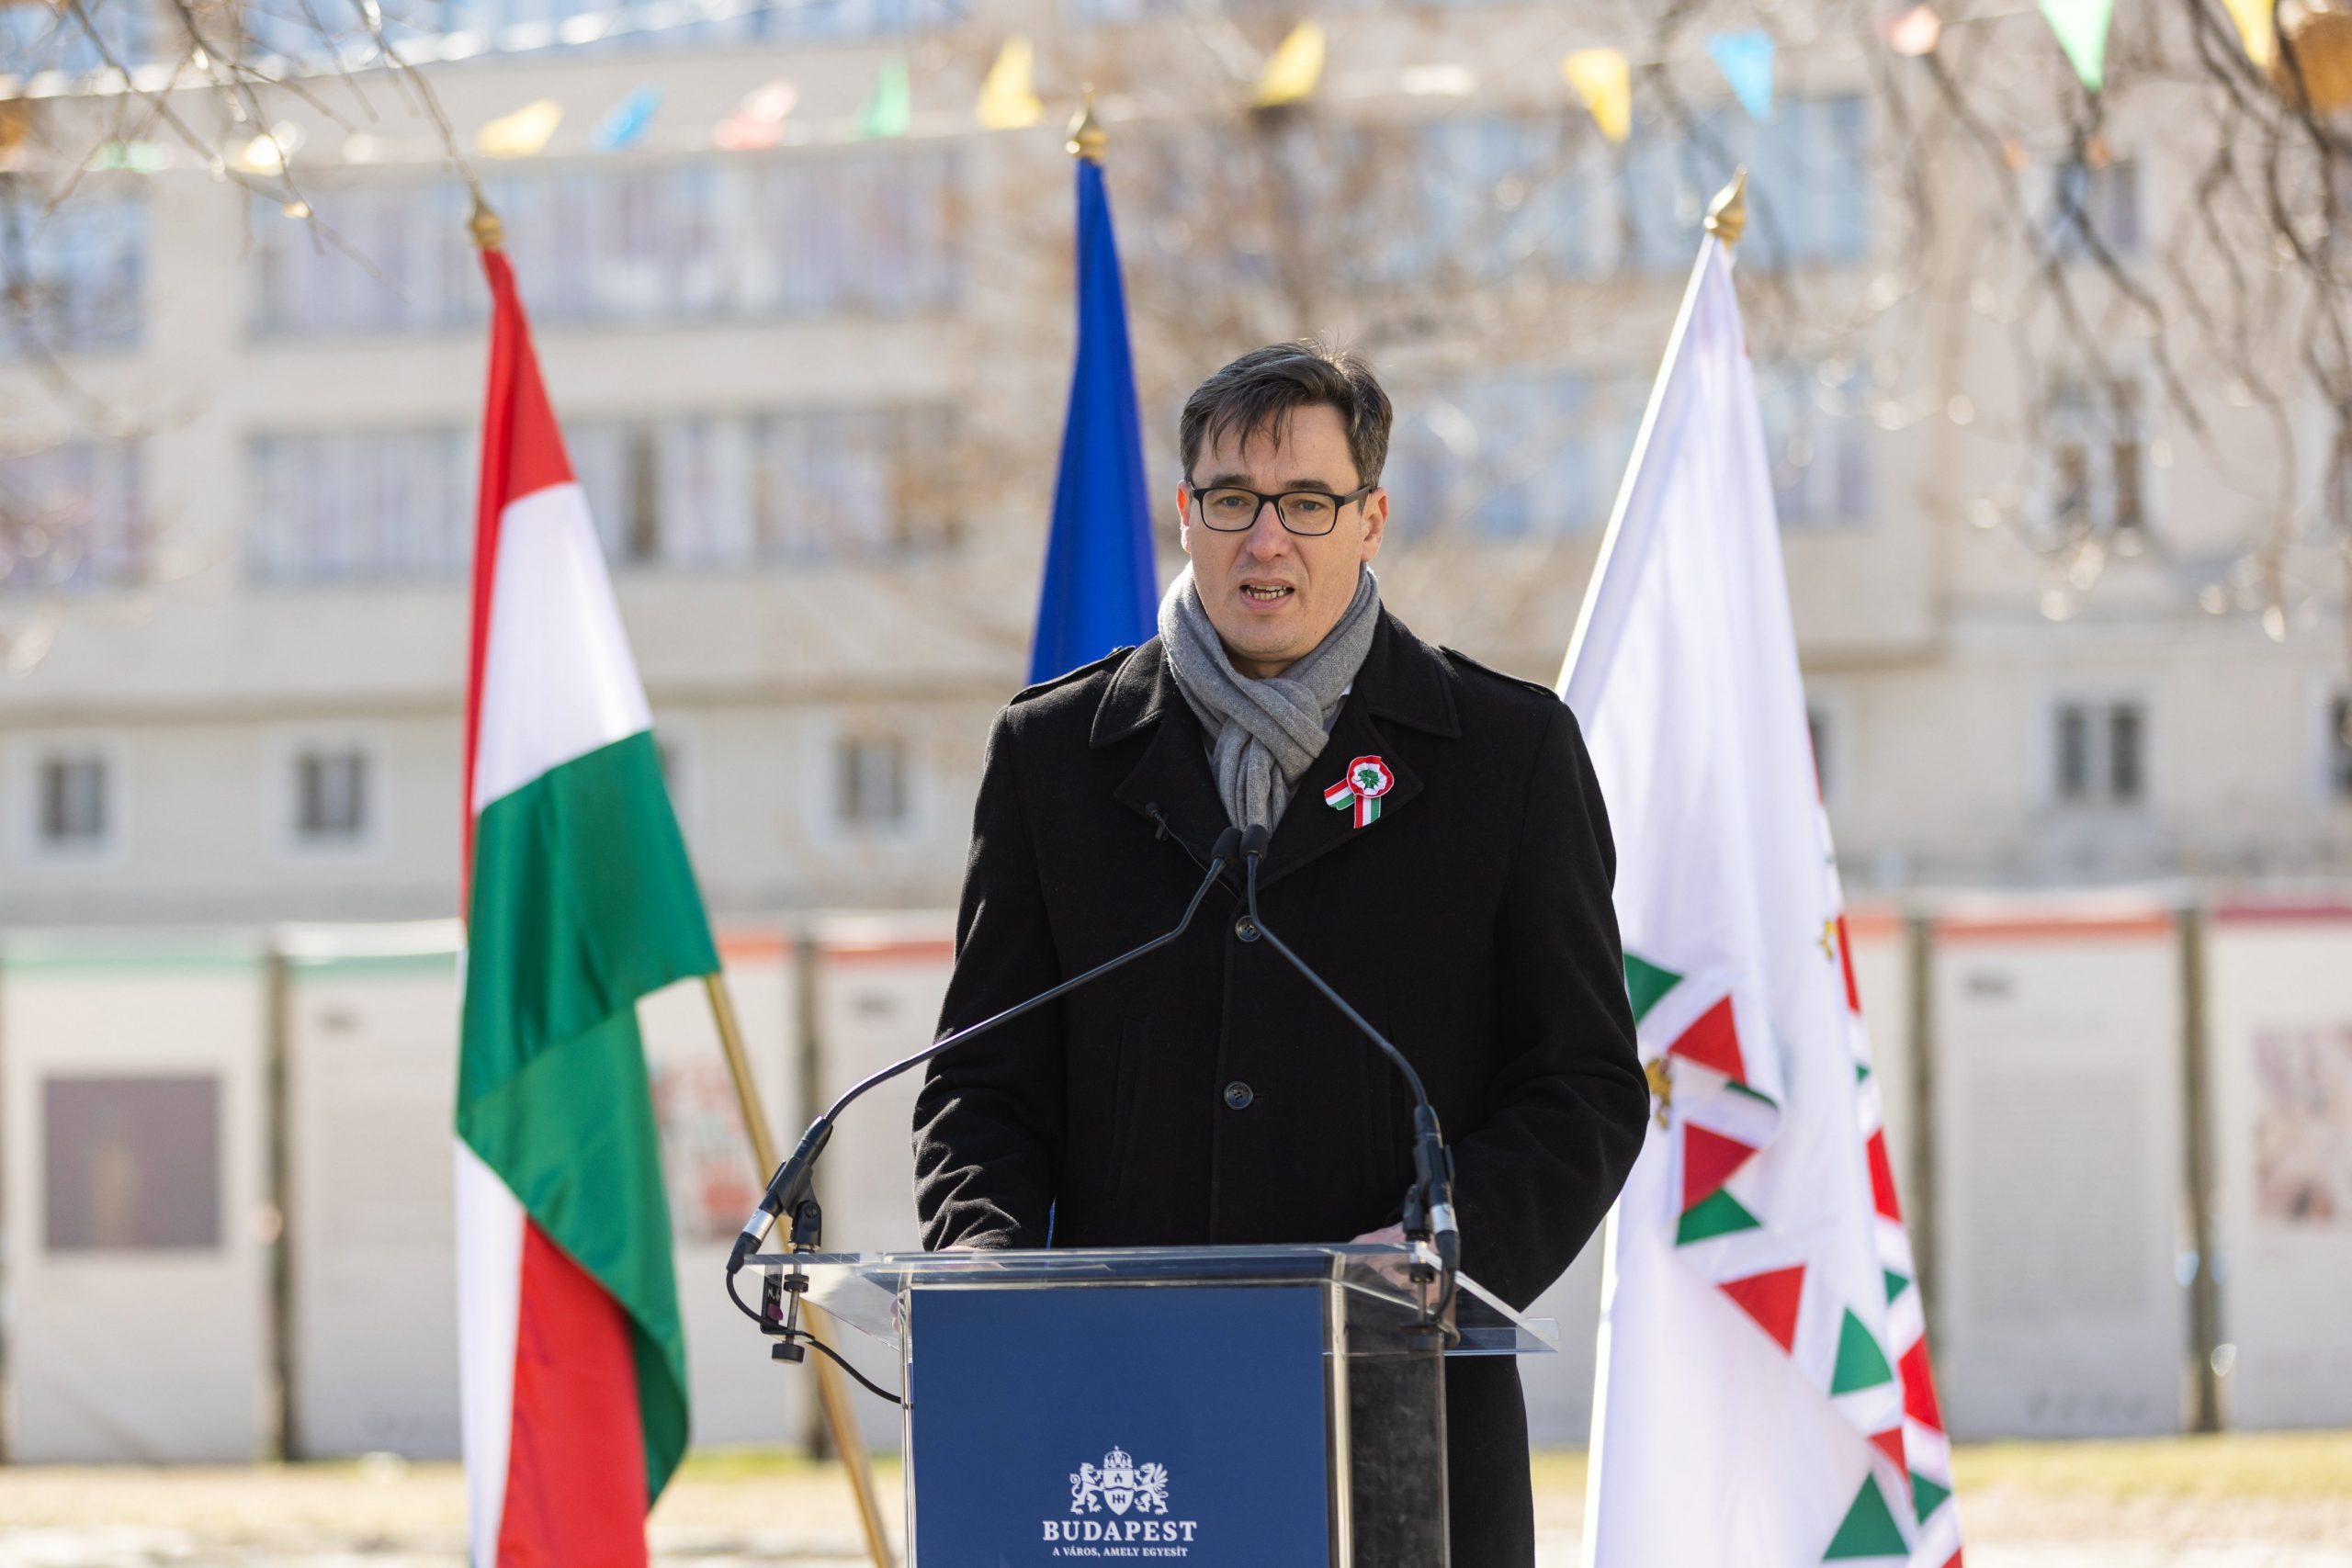 March 15 - Budapest Mayor: Hungarian Uprisings 'Always for Peace, Freedom'